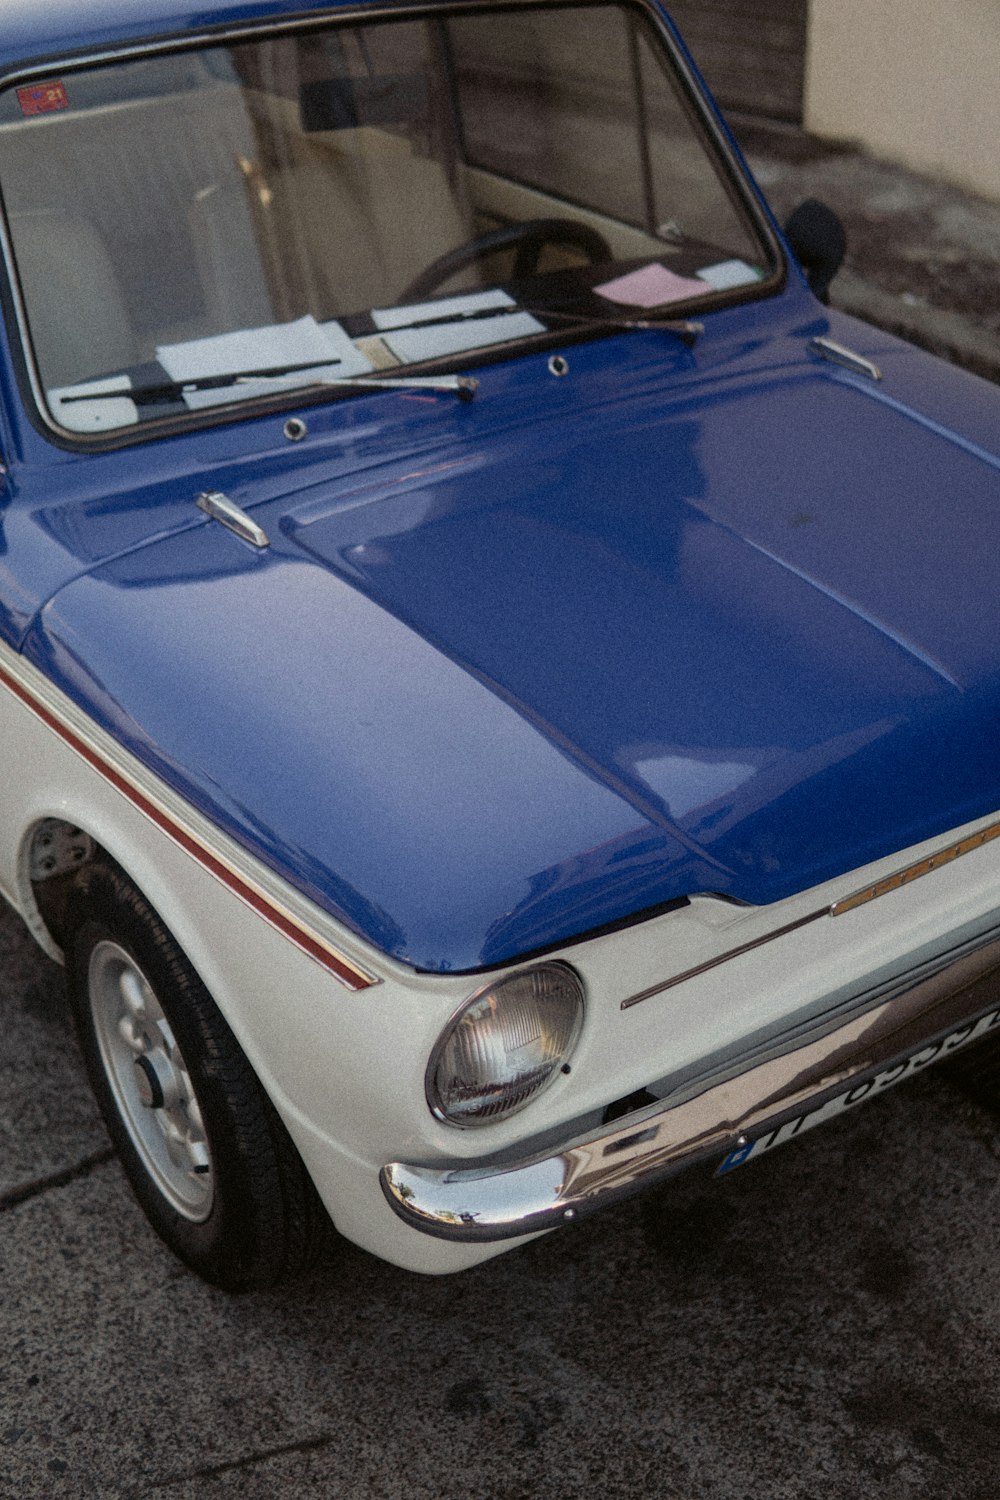 a blue and white car parked on the side of the road